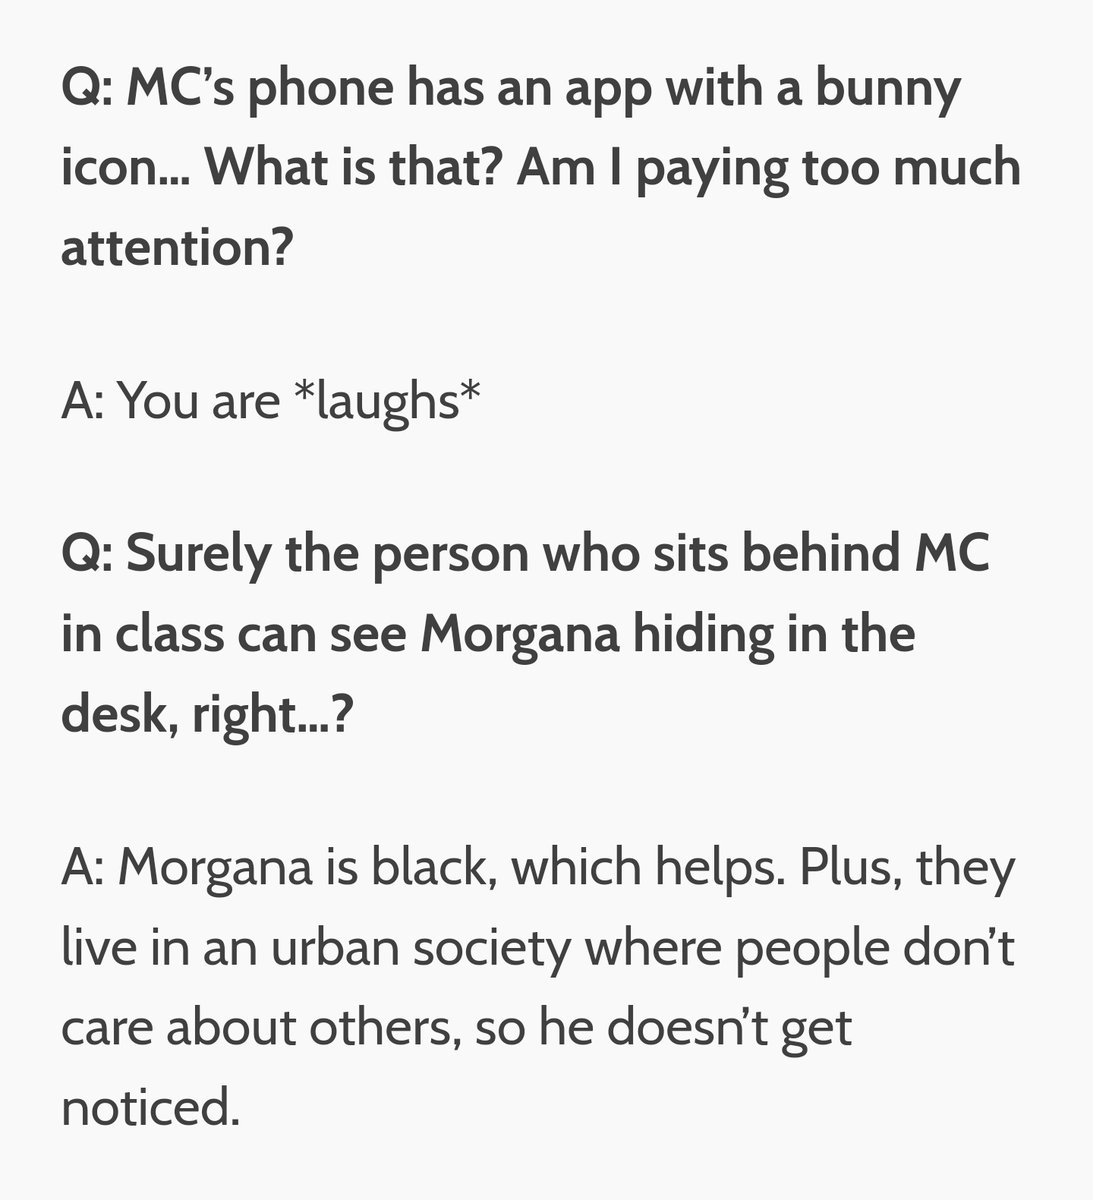 we have answers to what the bunny app on jokers phone is it's when you pay too much attention